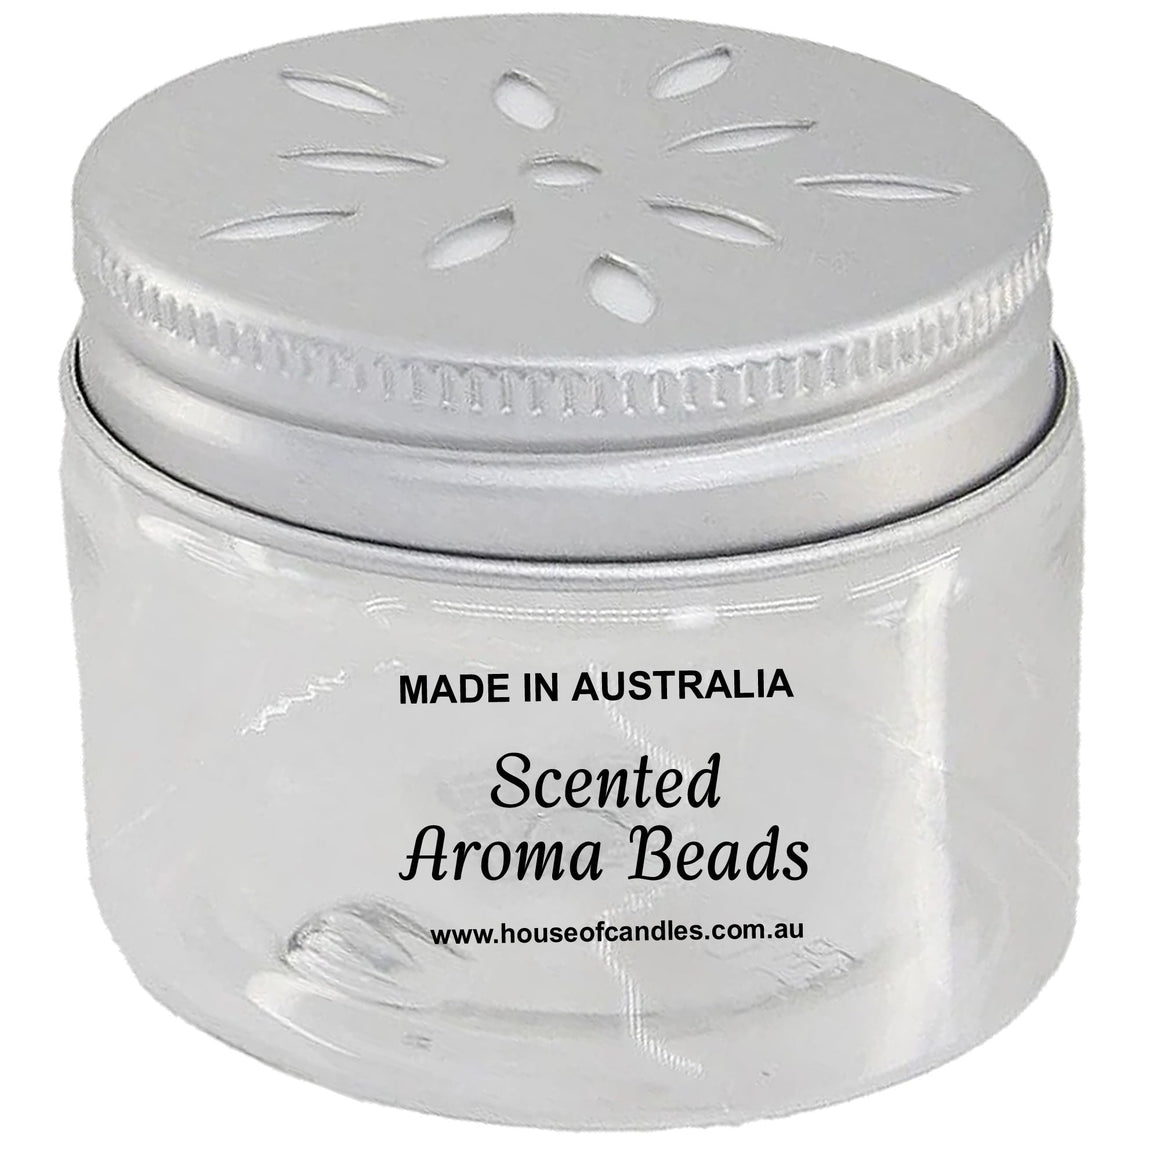 Coconut & Pineapple Scented Aroma Beads Room/Car Air Freshener